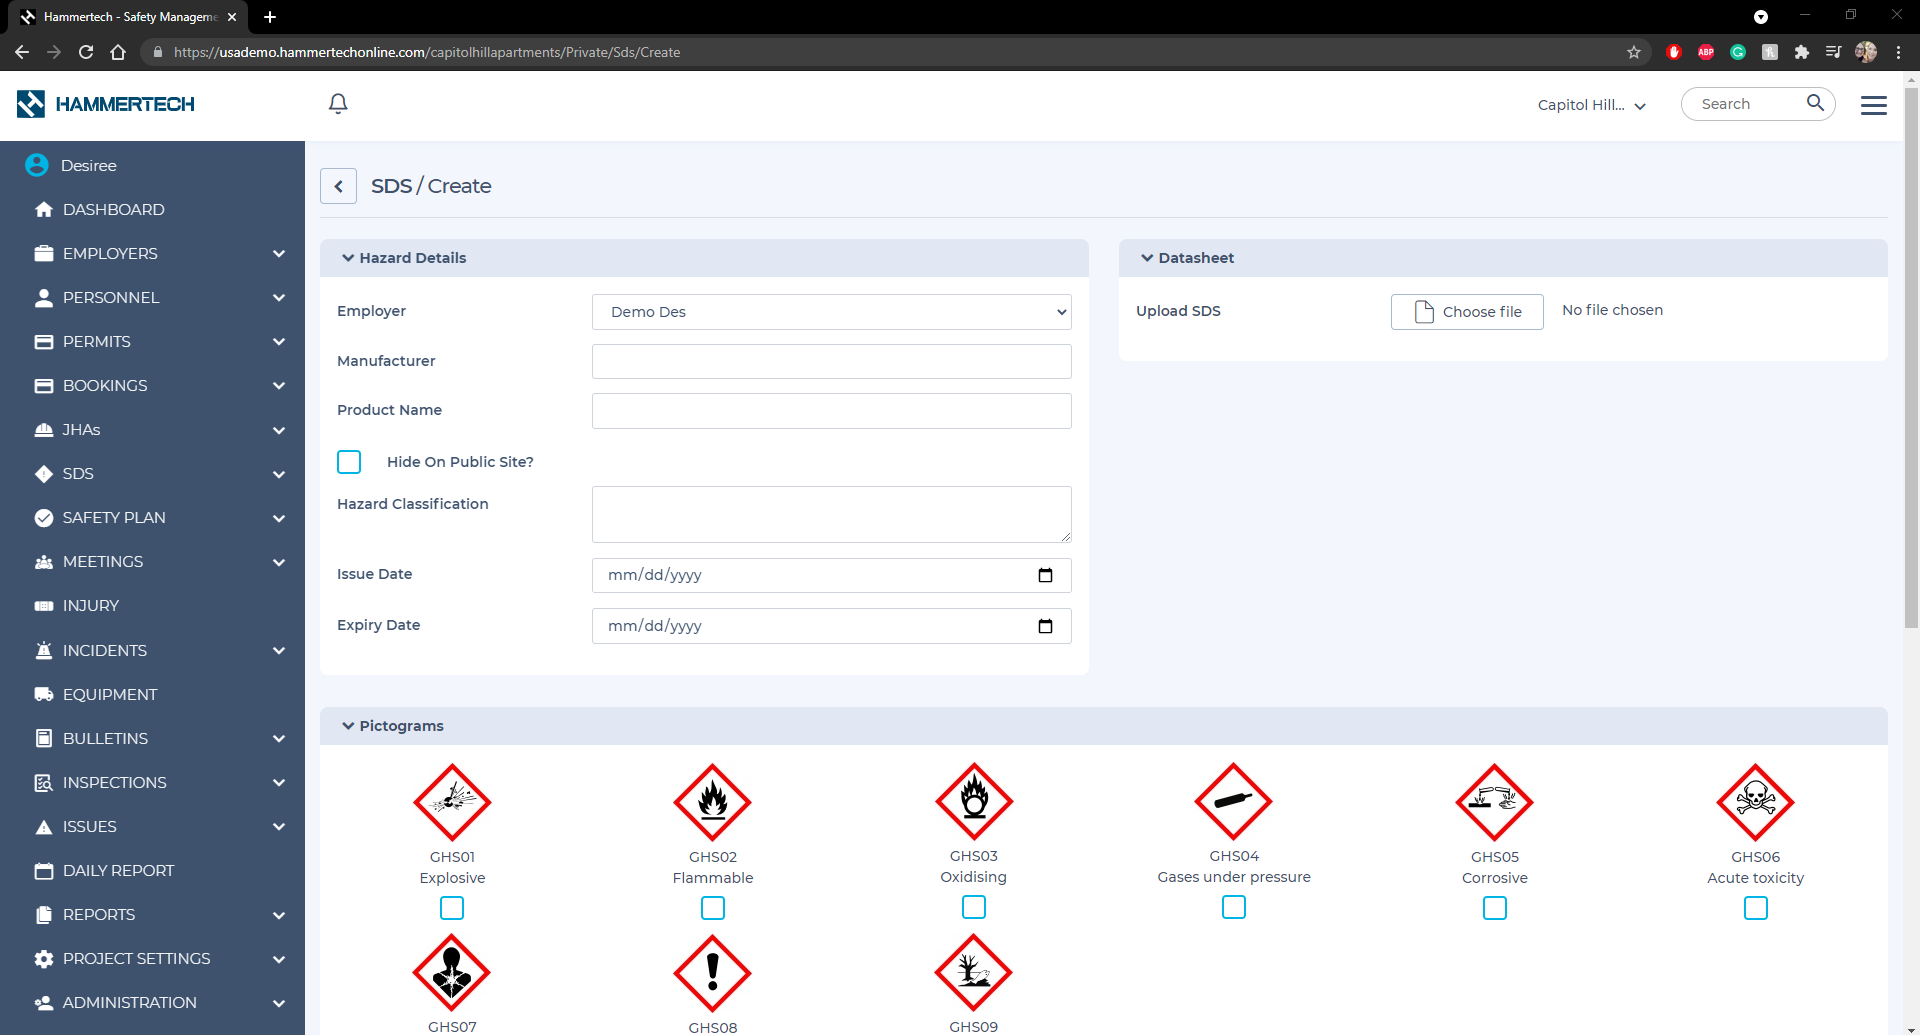 Screen capture of HammerTech's SDS (Safety Data Sheet) module, showcasing an interface for creating and managing SDS records. The module allows for entering comprehensive hazard information with corresponding pictograms, providing a clear, visual depiction of potential risks. This image underscores the platform's emphasis on centralized safety data management, designed to ensure all construction site team members have access to crucial safety information.